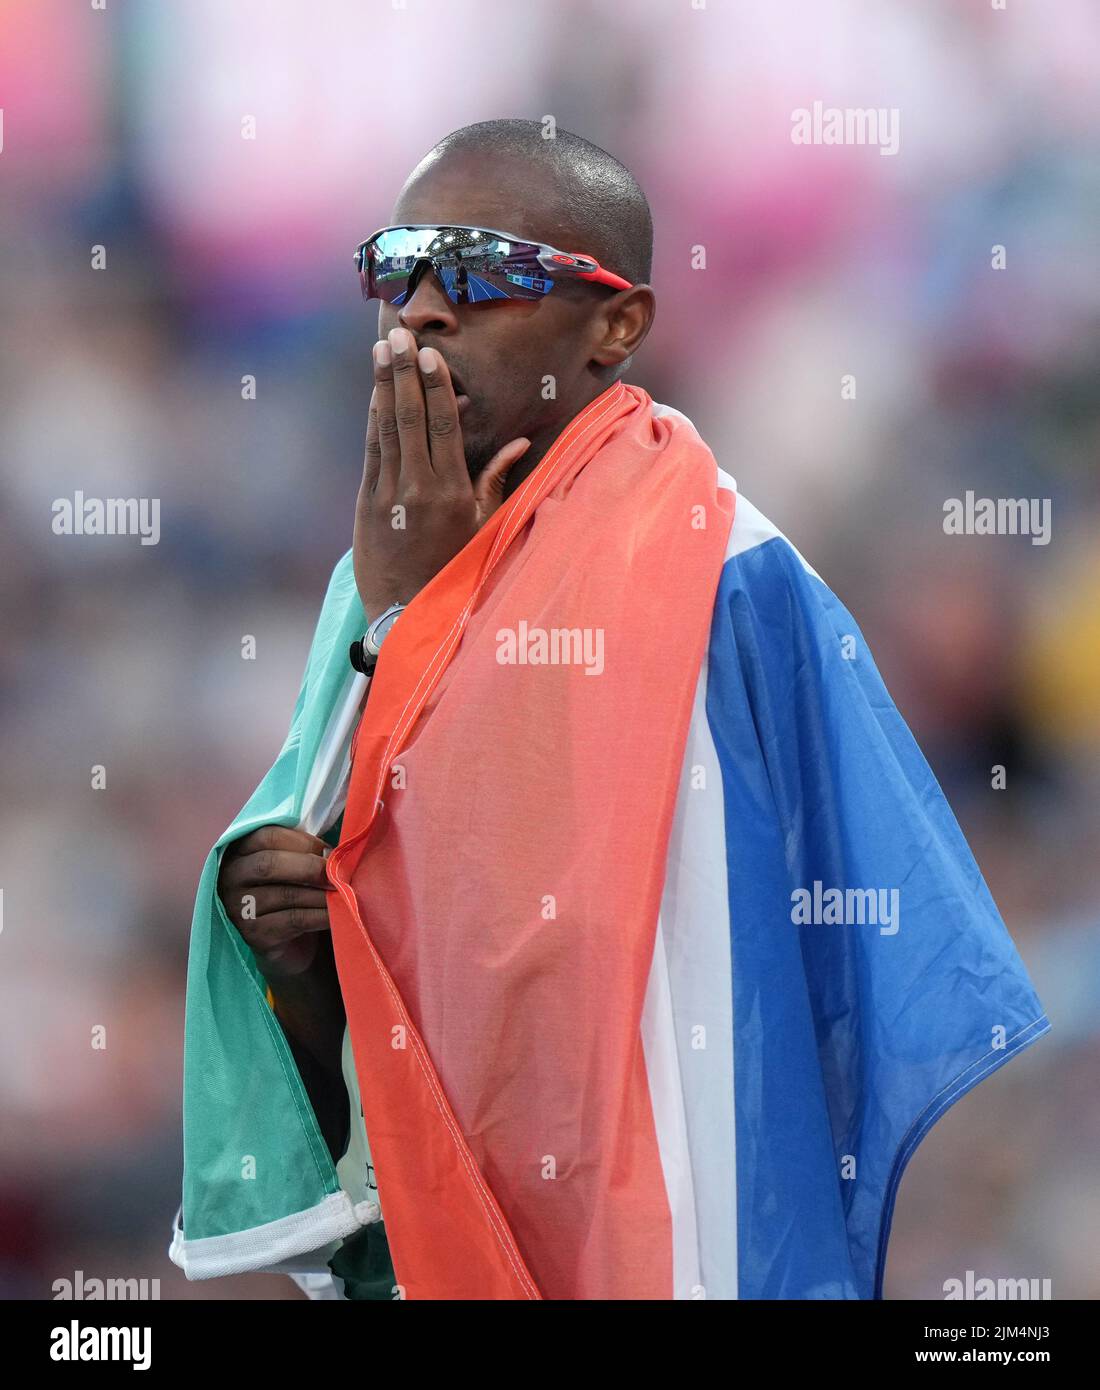 Gold medal winner South Africa's Ndodomzi Jonathan Ntutu after the Men's T11/12 100m Final at Alexander Stadium on day seven of the 2022 Commonwealth Games in Birmingham. Picture date: Thursday August 4, 2022. Stock Photo